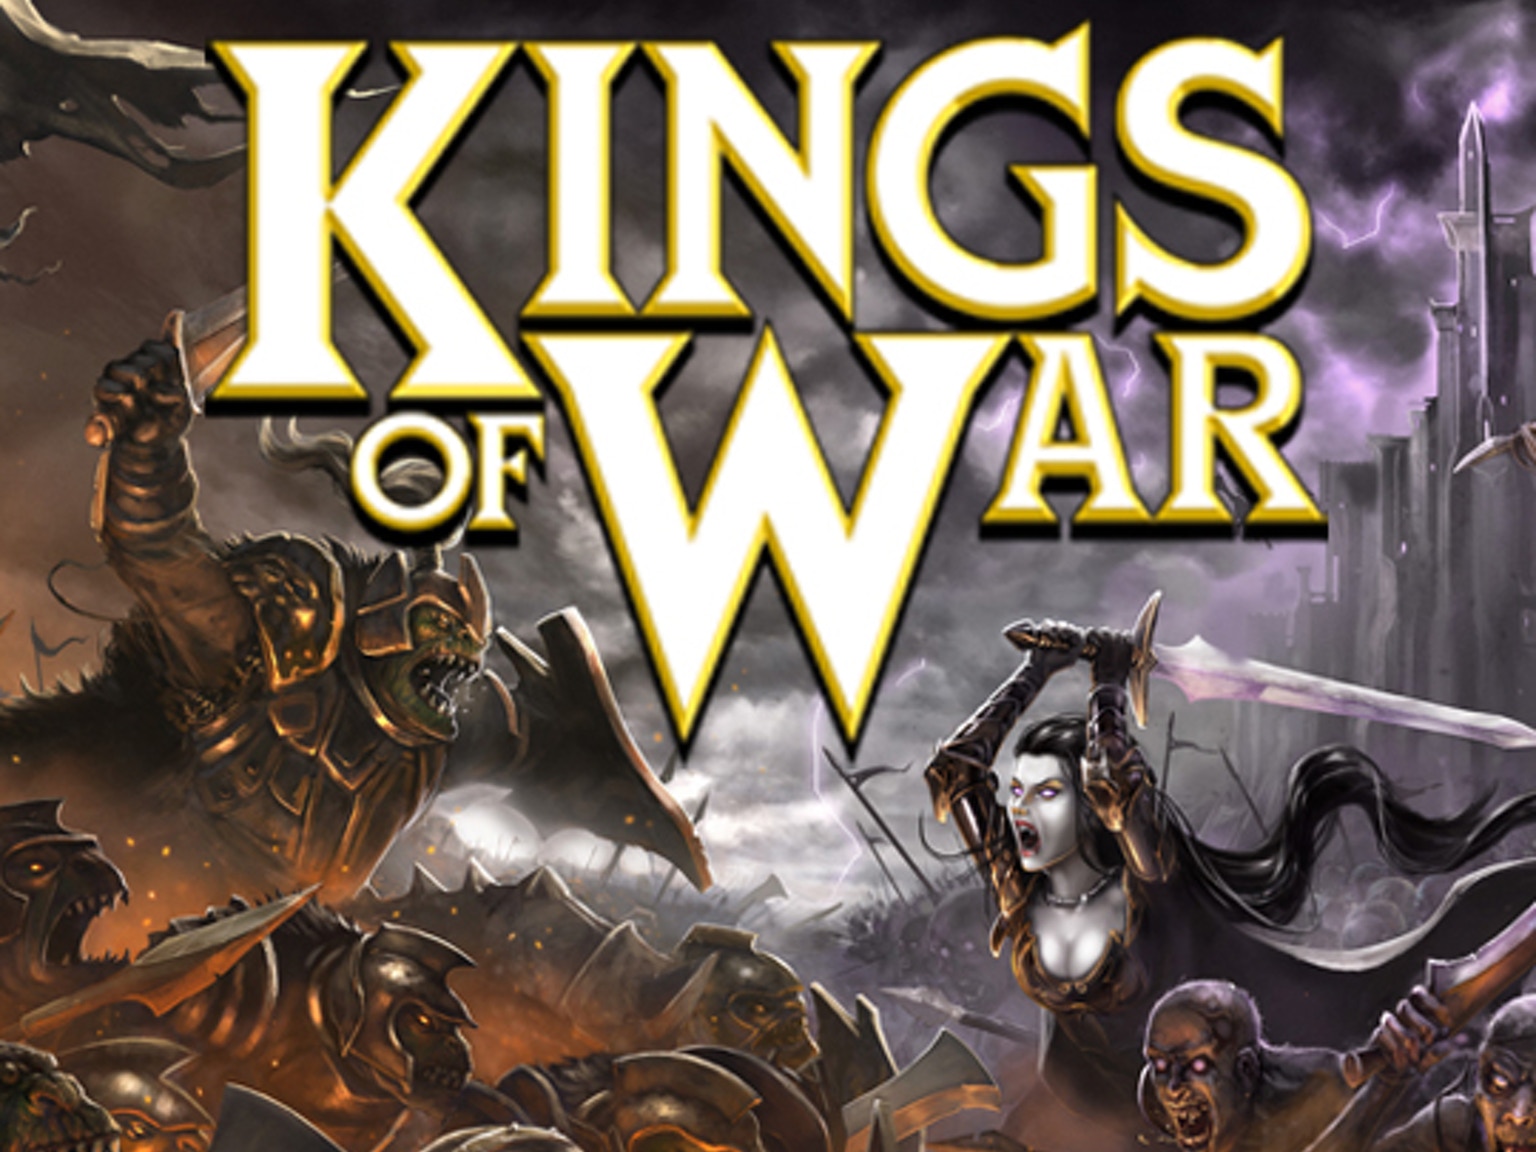 Kings of War Day At The AWC